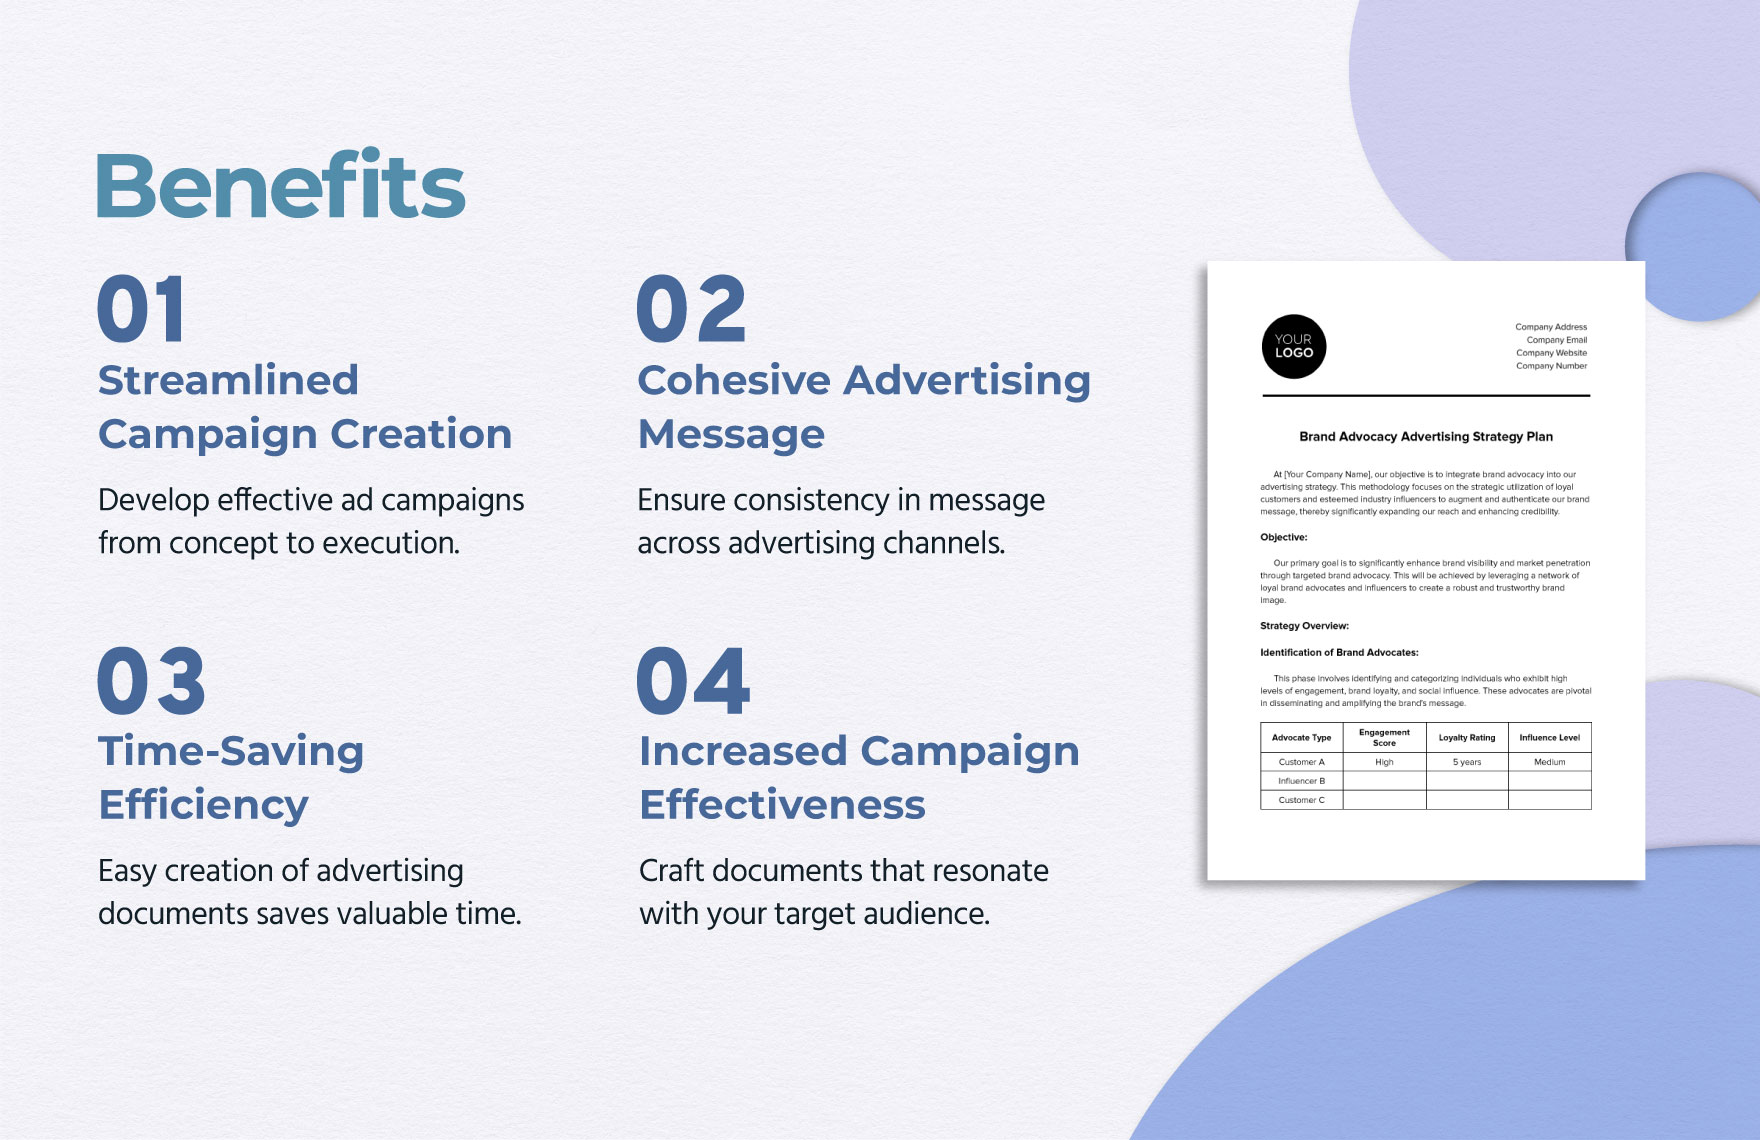 Brand Advocacy Advertising Strategy Plan Template